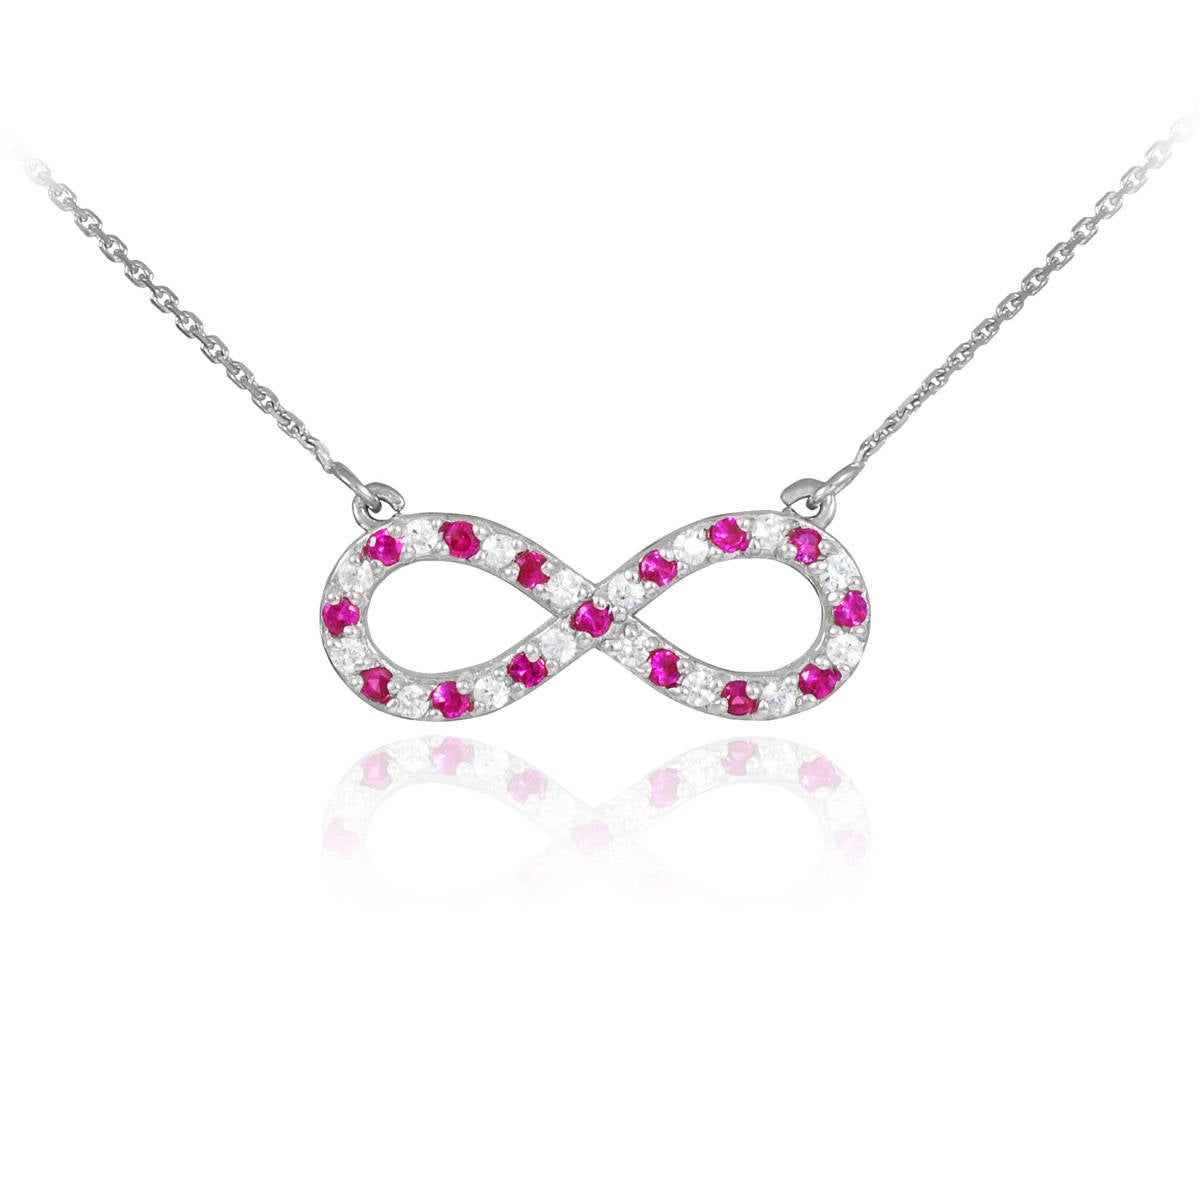 14K Gold Diamond and Ruby Infinity Necklace (yellow, white, rose gold) Karma Blingz